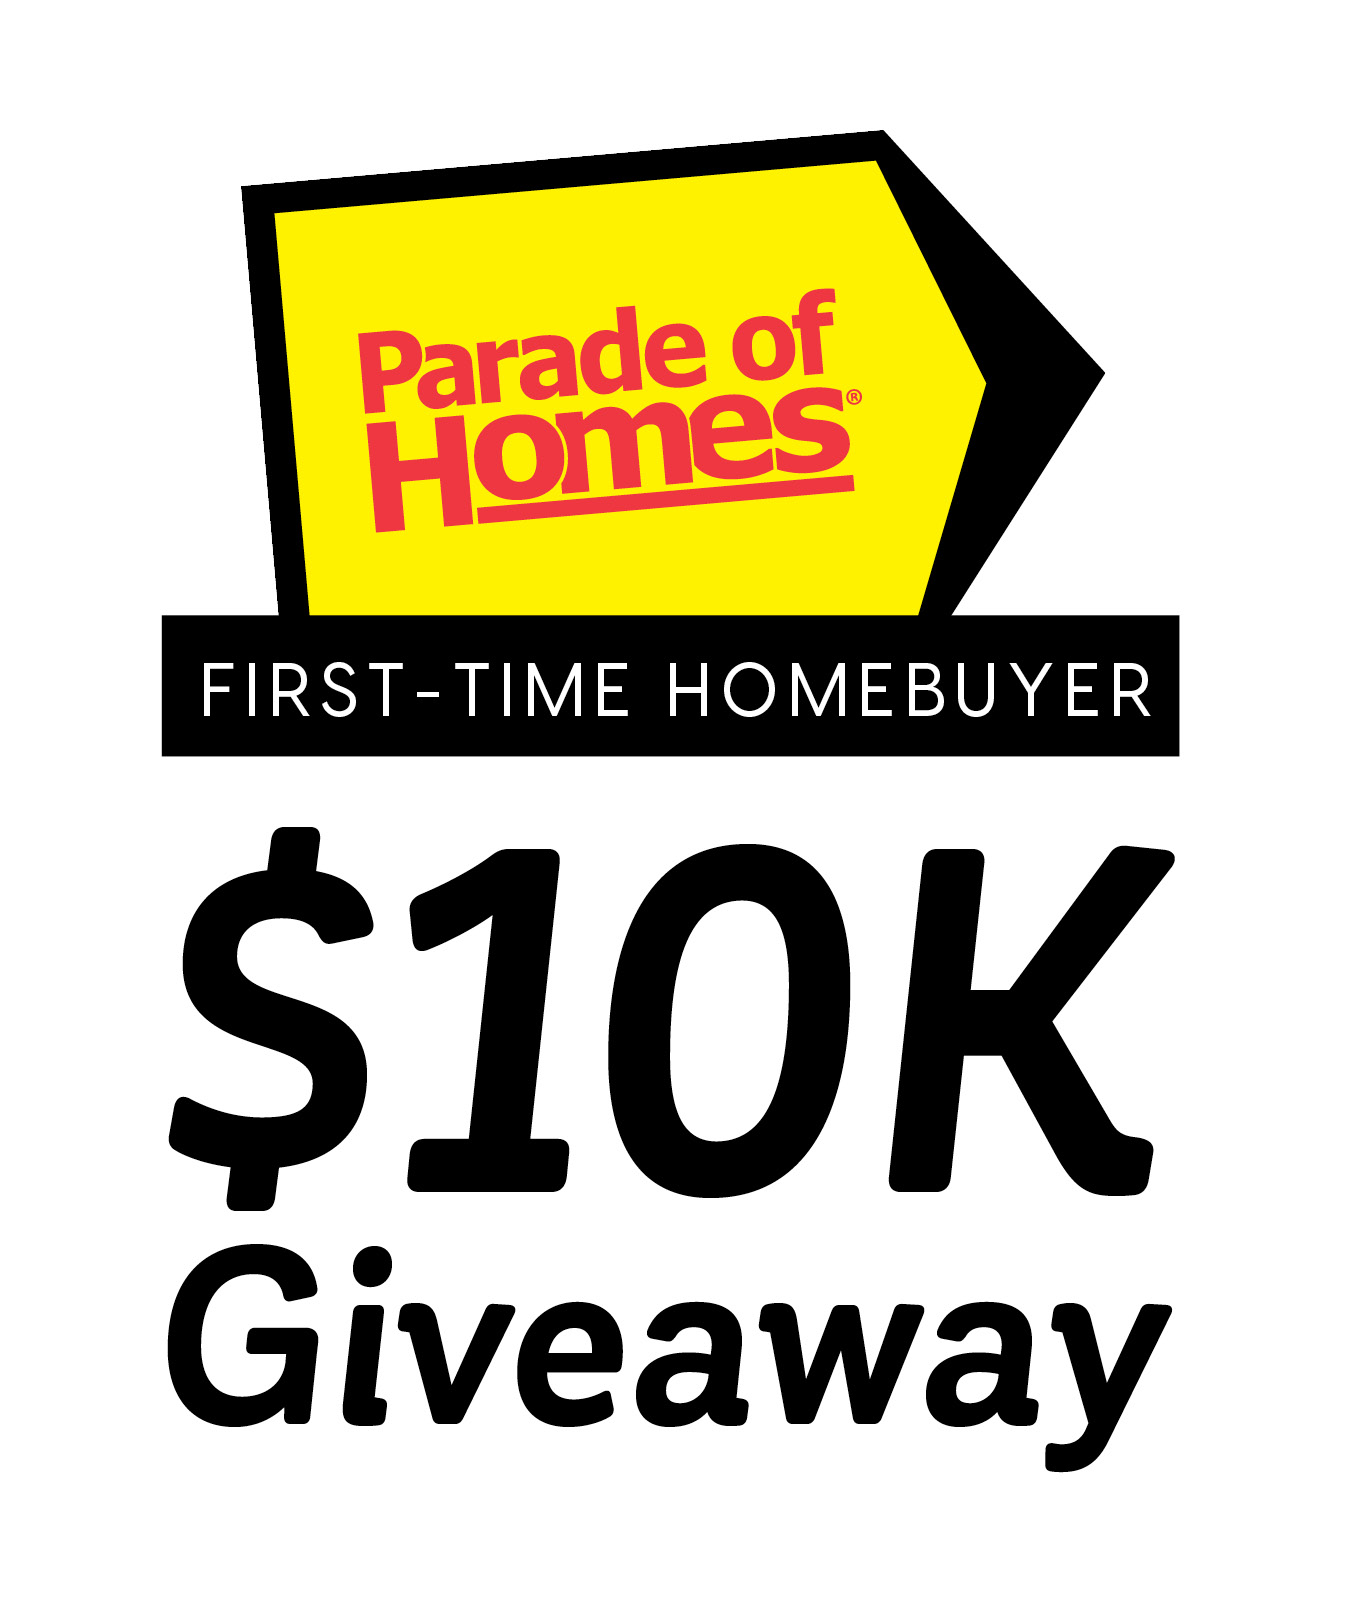 Image for Parade of Homes Launches First-Time Homebuyer $10K Giveaway with Spring Event